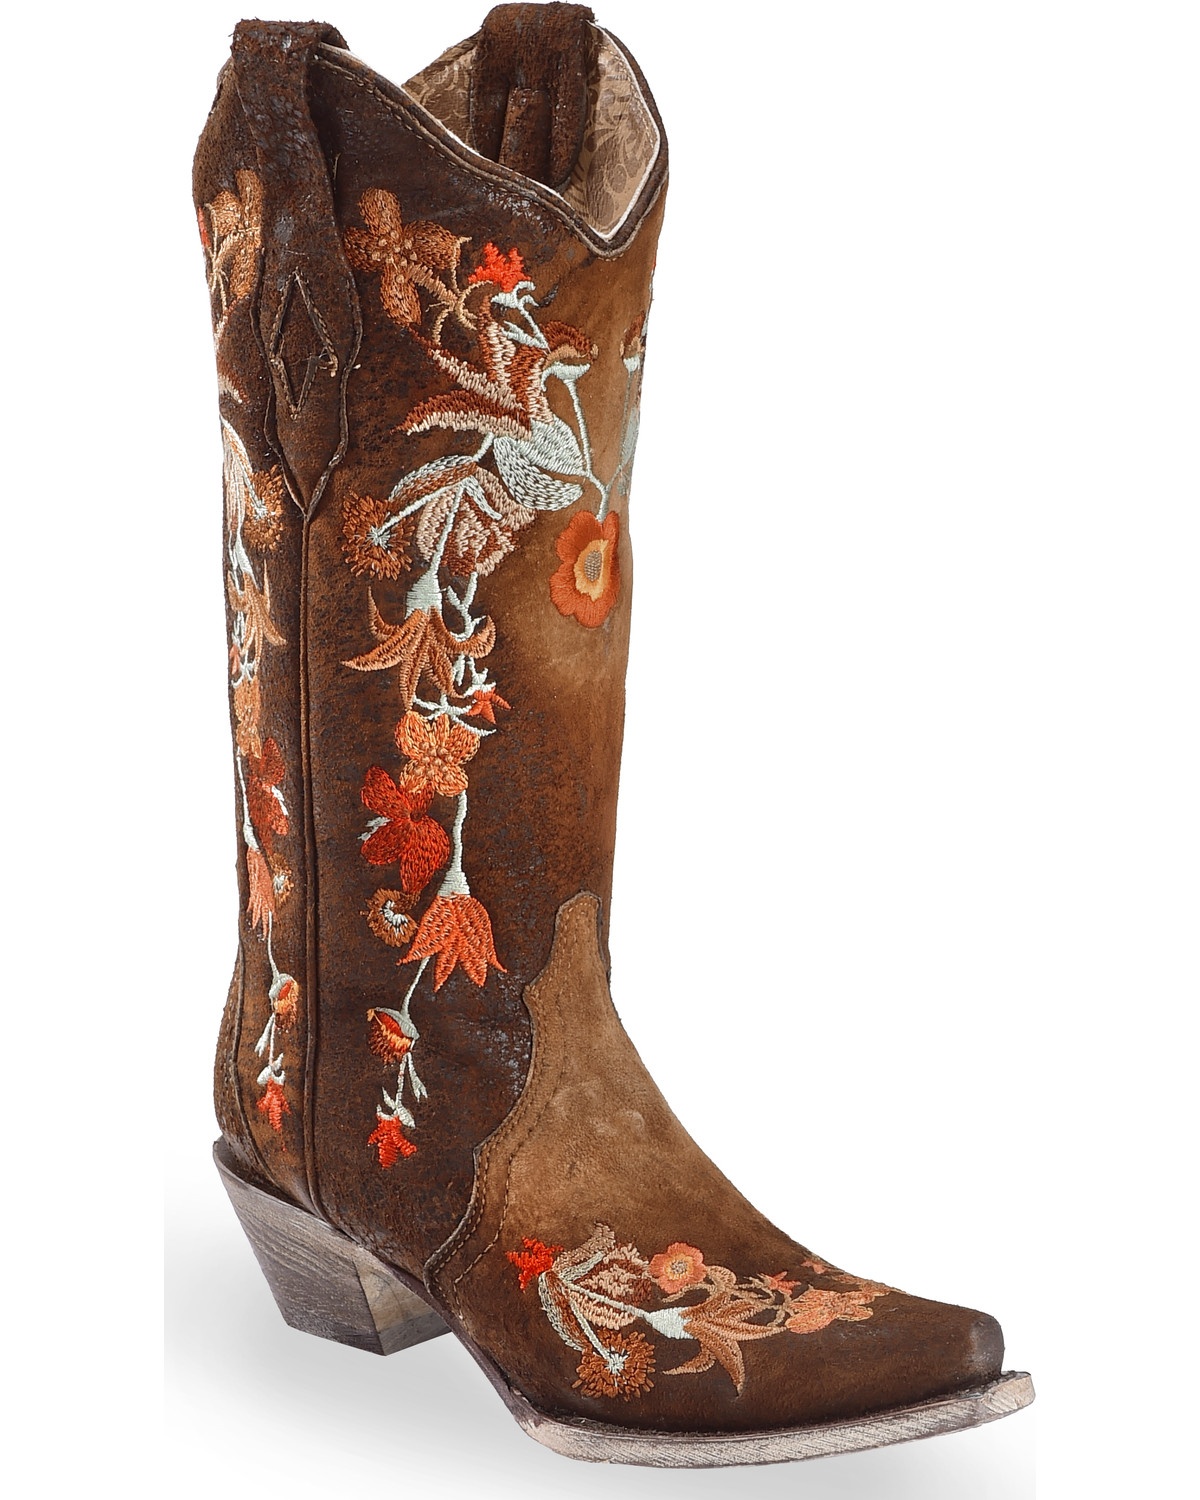 Corral Women's Floral Embroidered Lamb Western Boots - Snip Toe